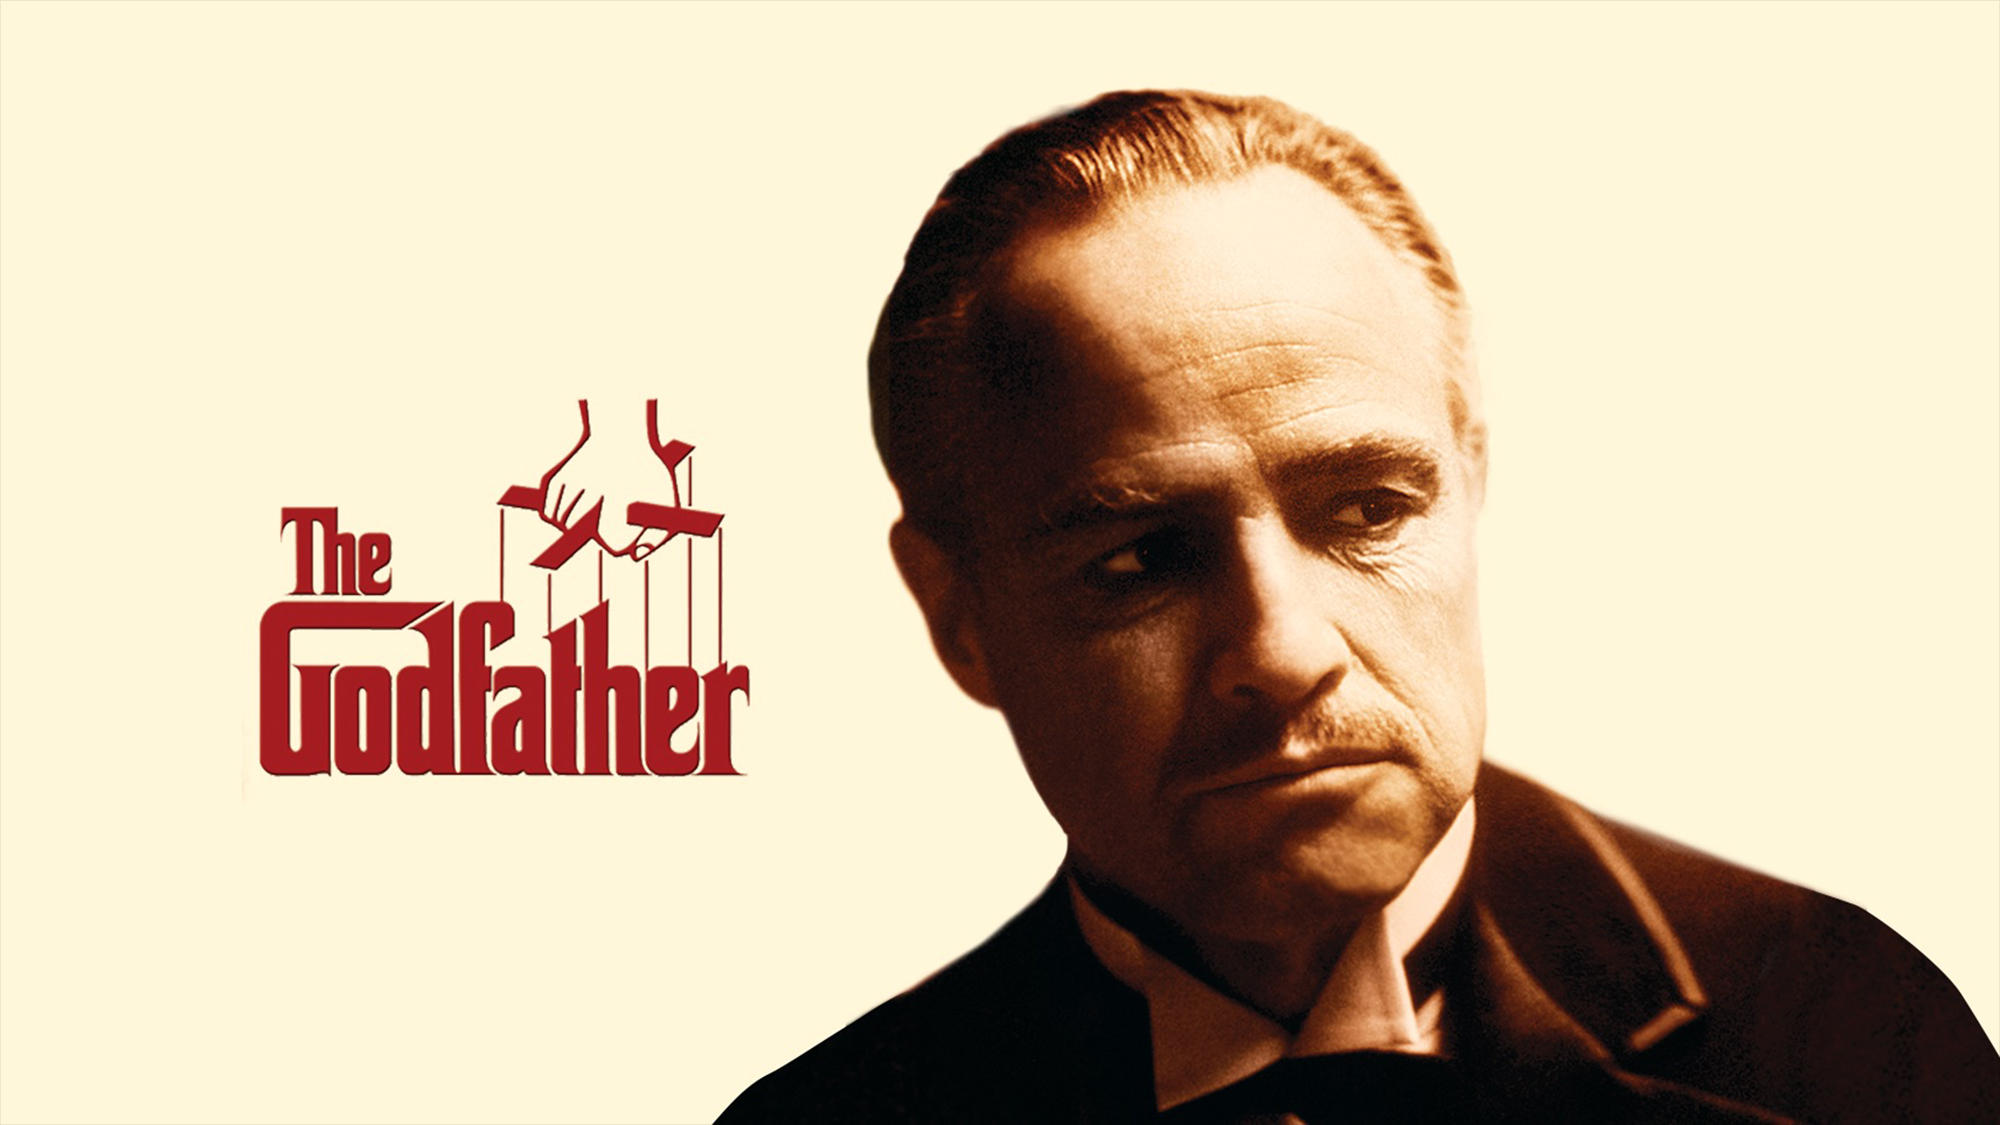 40+ The Godfather HD Wallpapers and Backgrounds